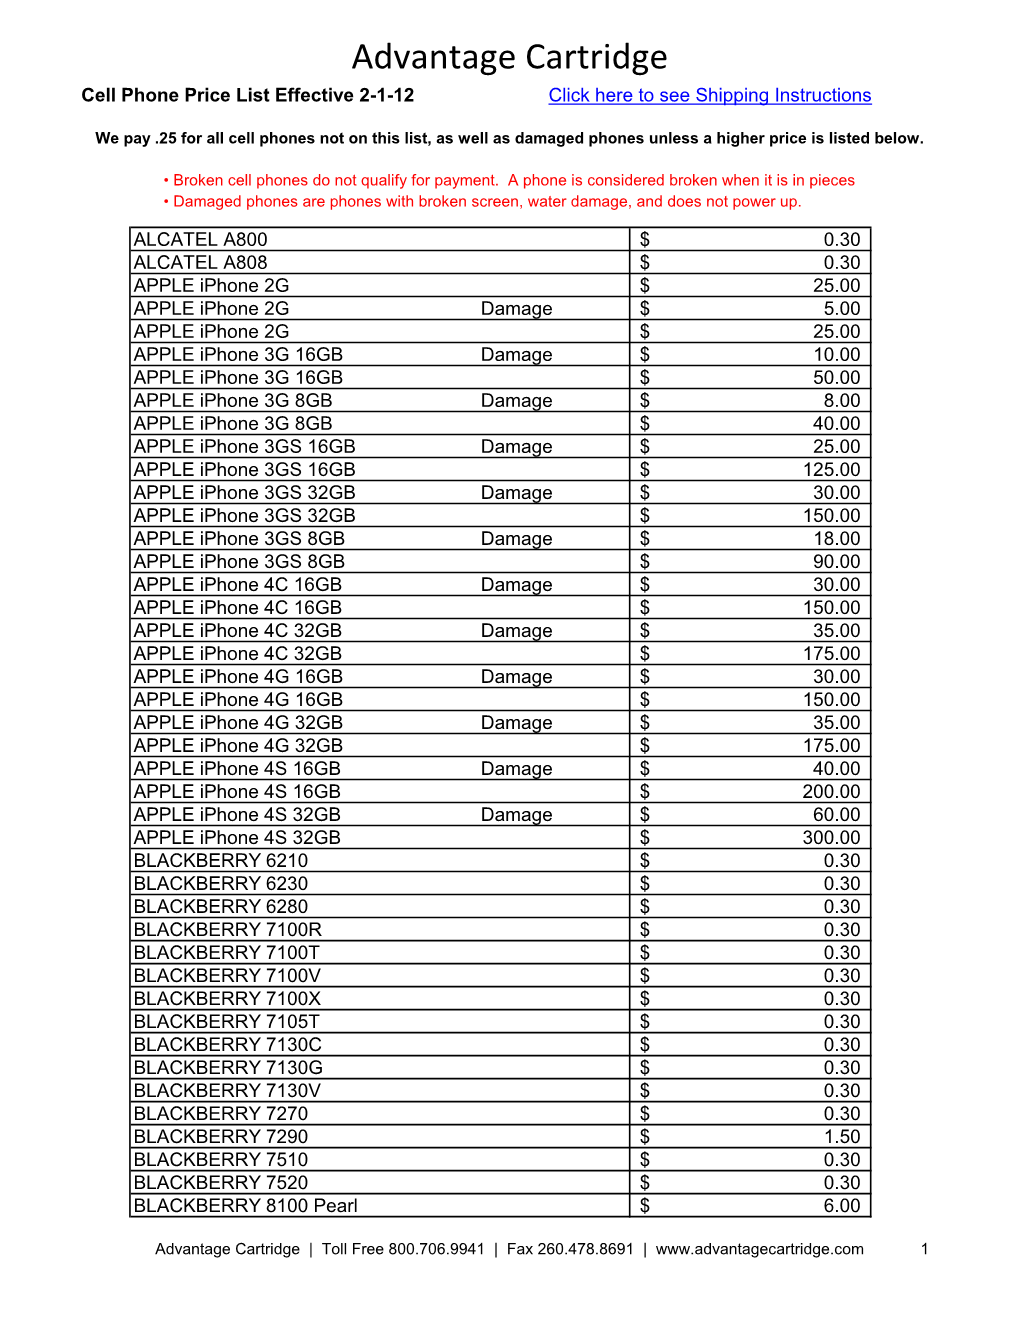 Advantage Cartridge Cell Phone Price List Effective 2-1-12 Click Here to See Shipping Instructions